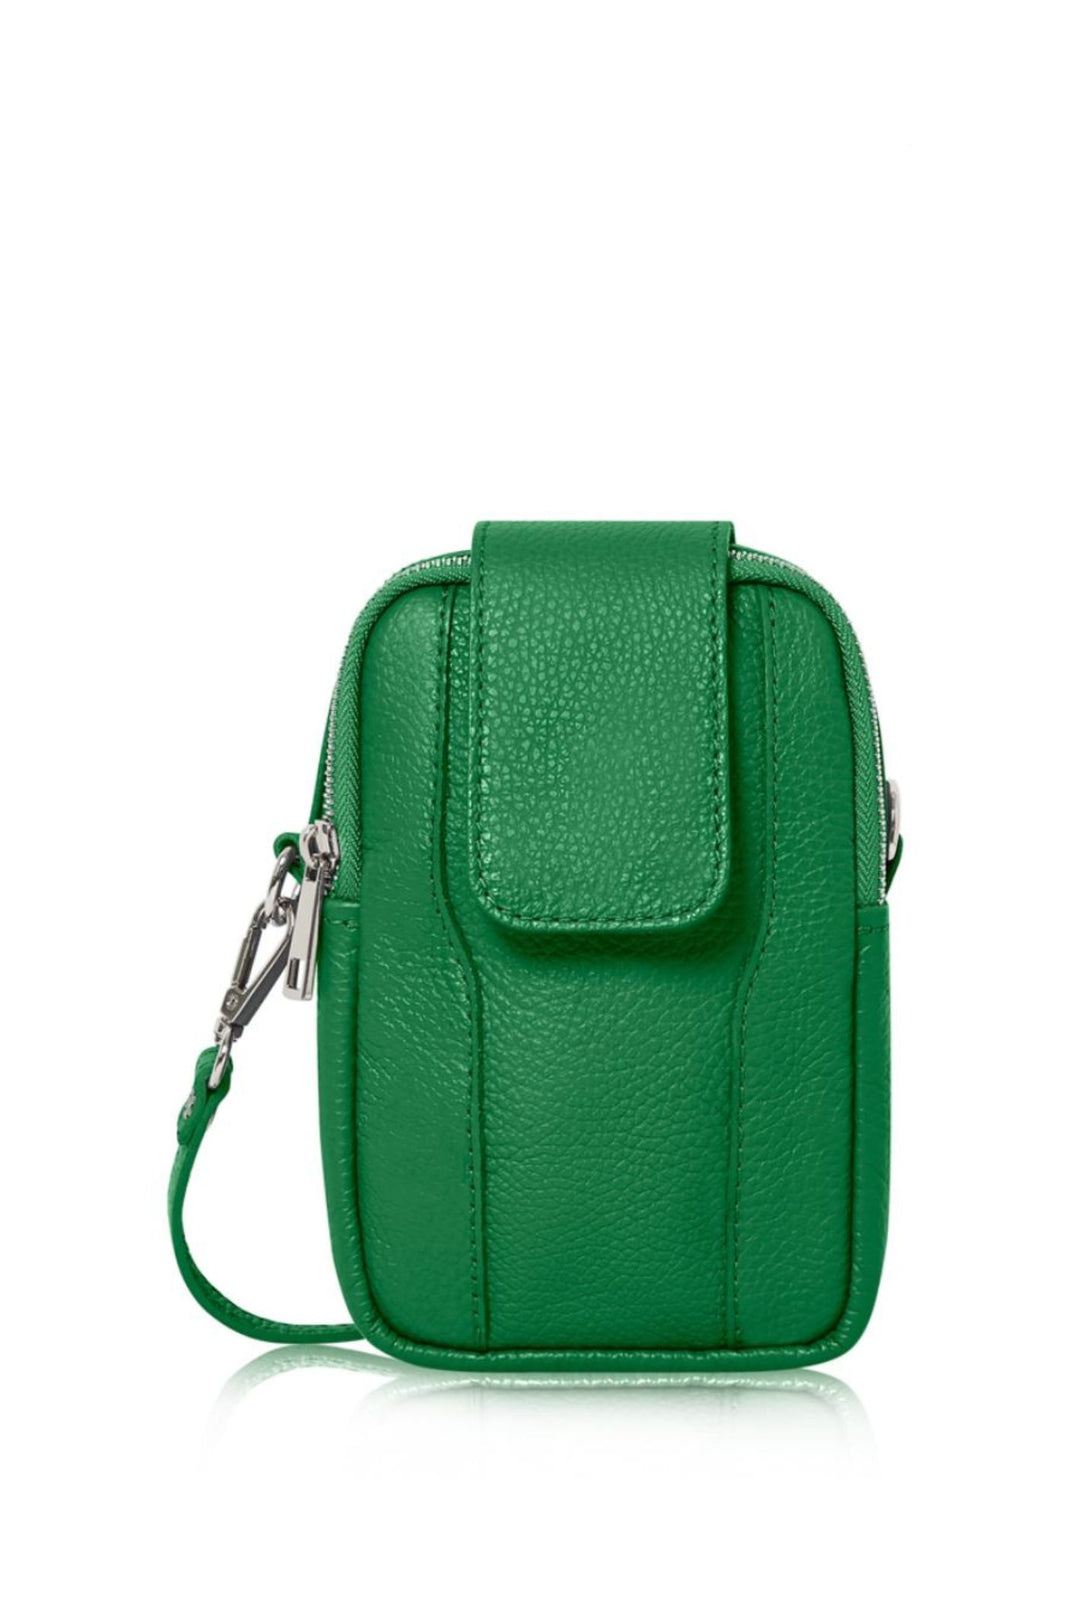 Green Leather Twin Compartment Cross Body Phone Bag